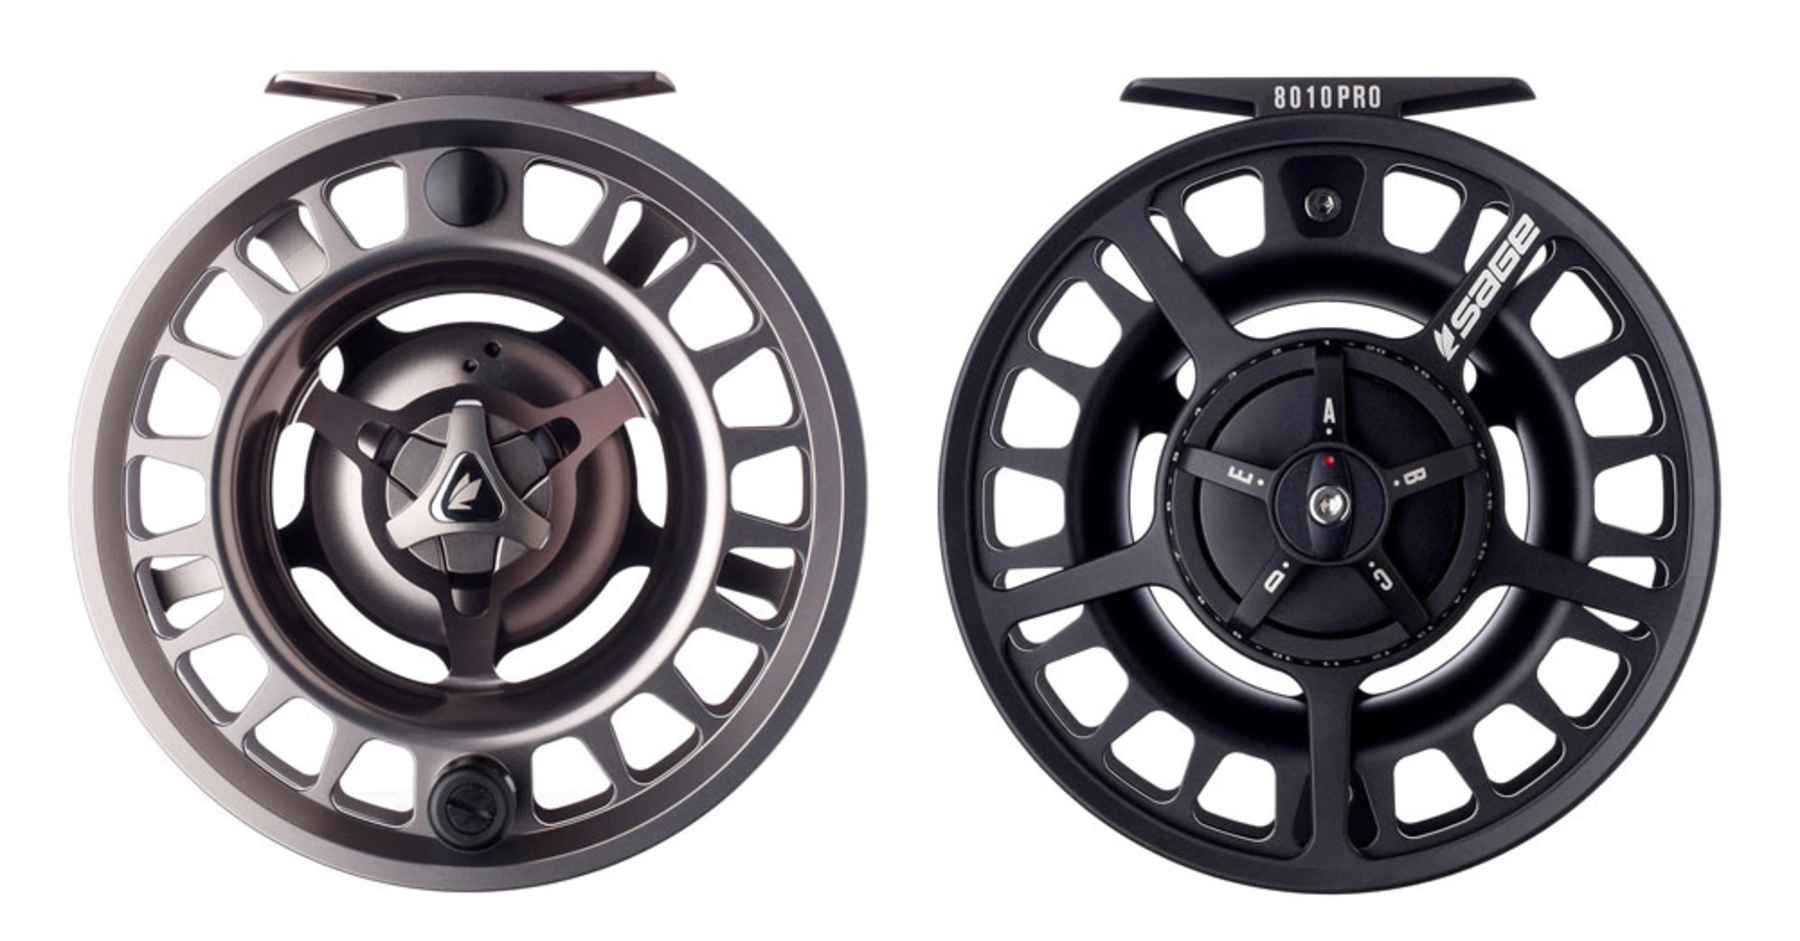 Sage Intros Two New Reels, Including the Dual-Drag 8000 PRO